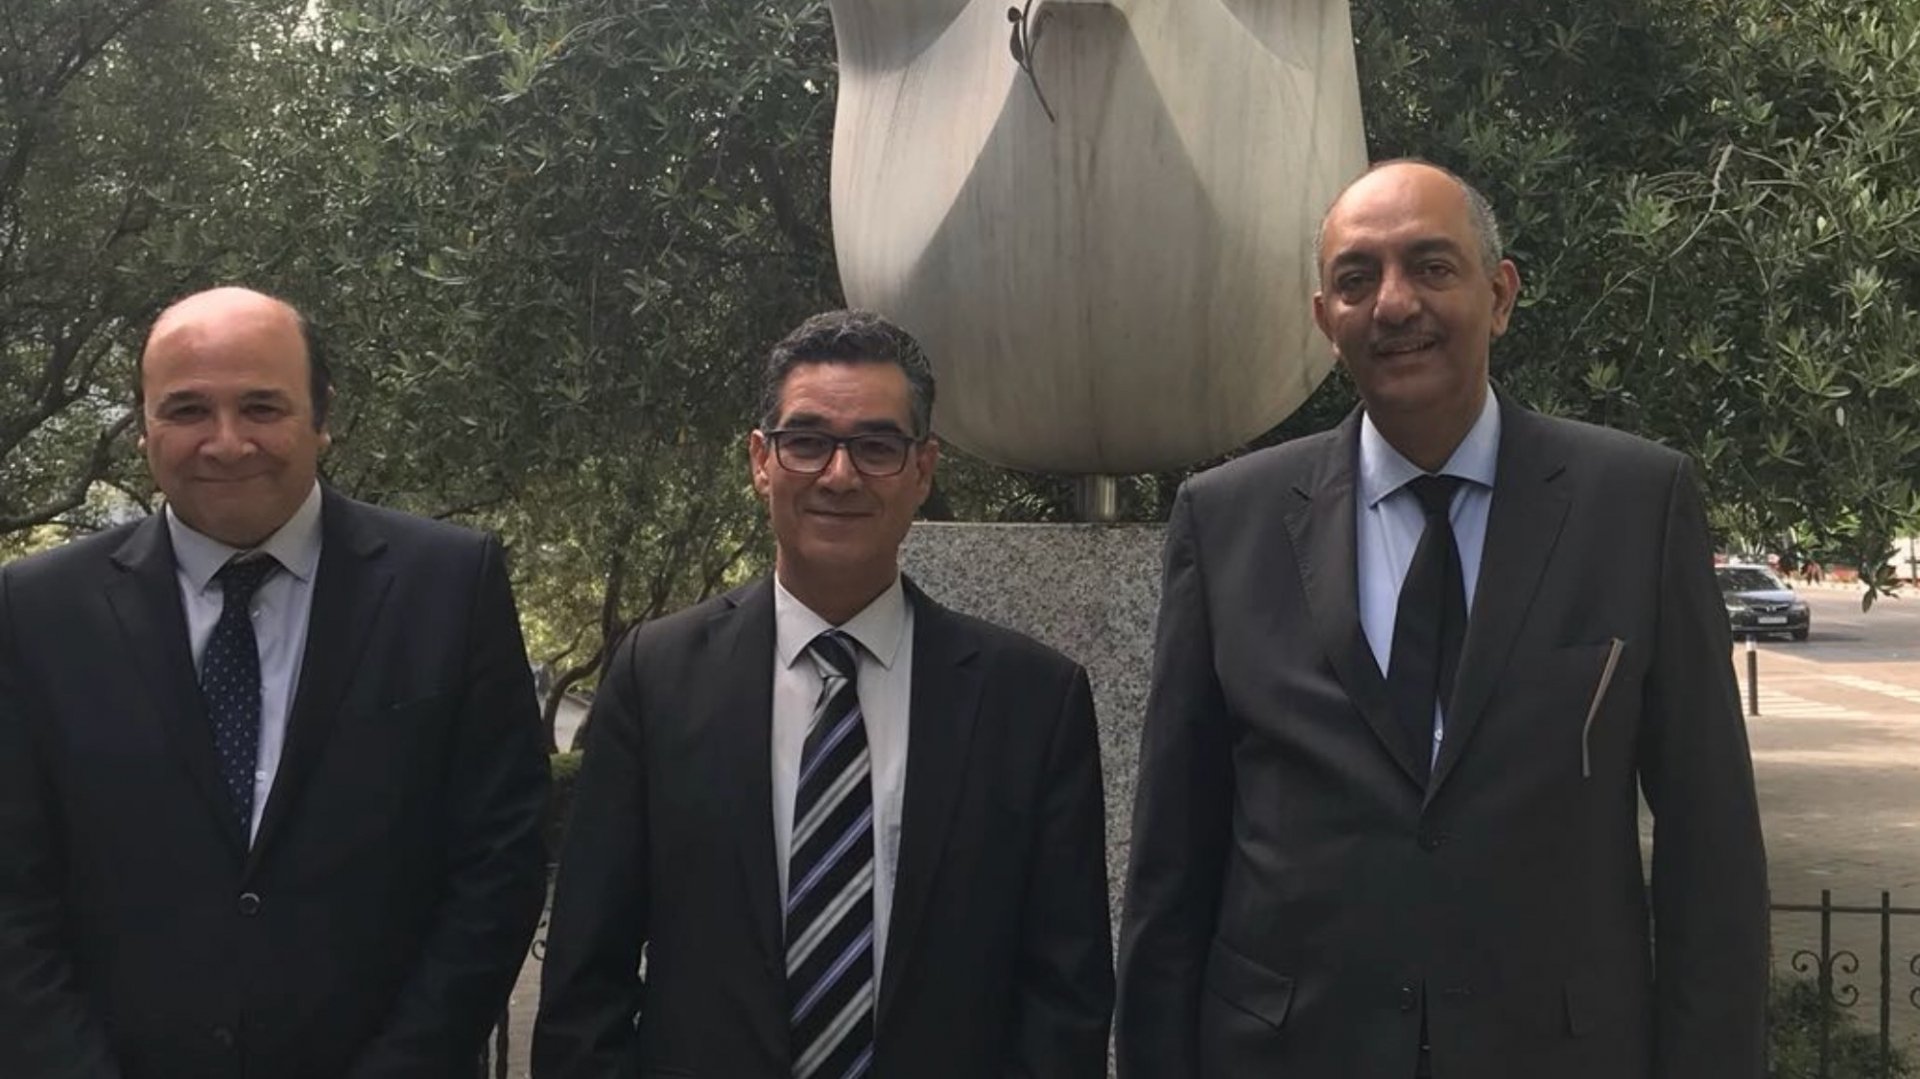 The Executive Director of the International Olive Council, Abdellatif Ghedira, makes an official visit to Cairo